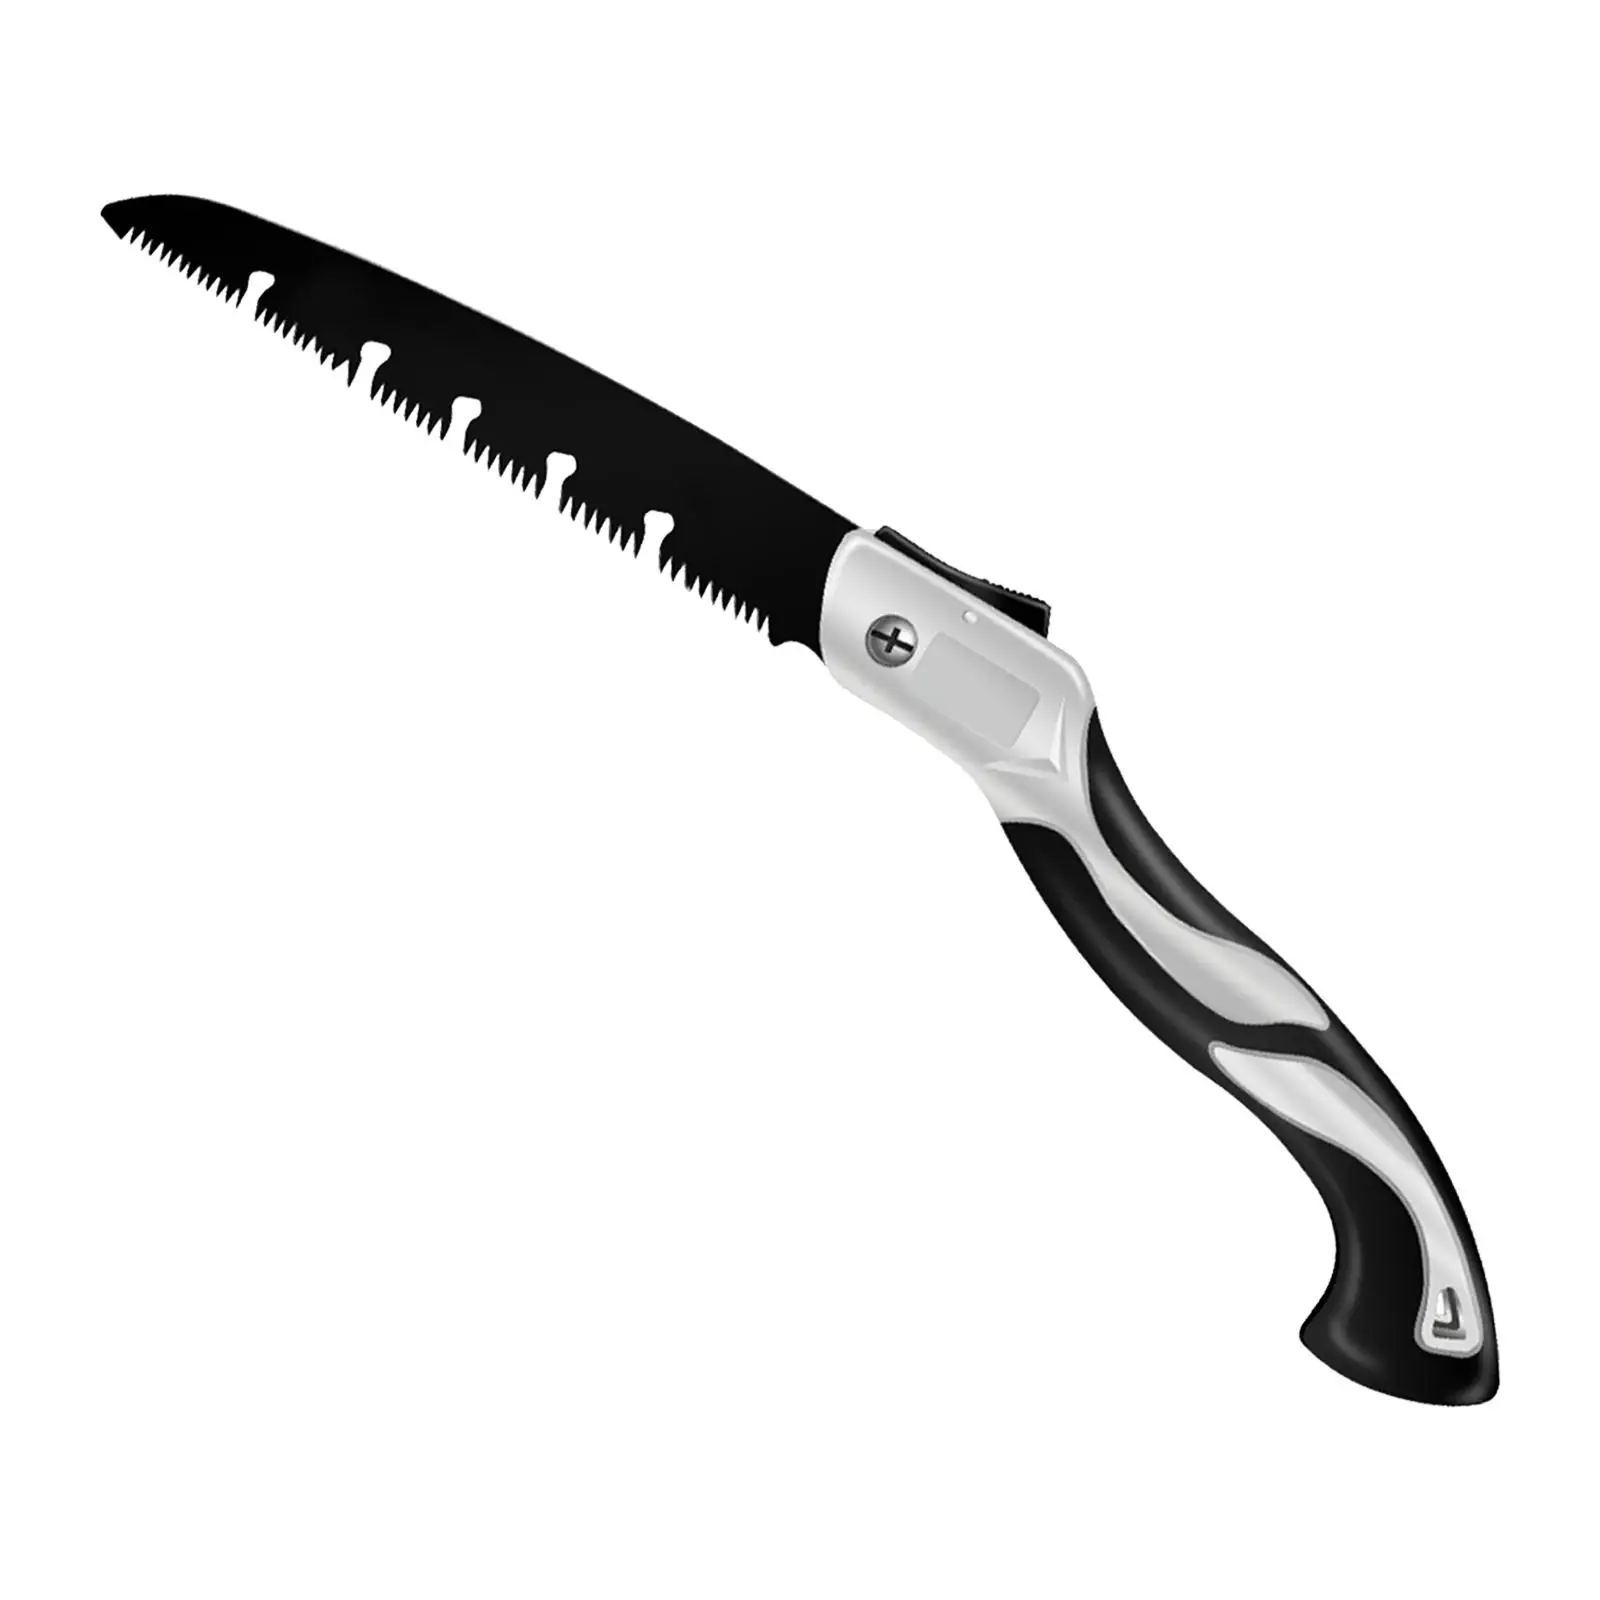 Folding Saw with Non Slip Grip Pruning Saw Hand Saw Wood Saw for Outdoors Landscaping Gardening Hiking Garden